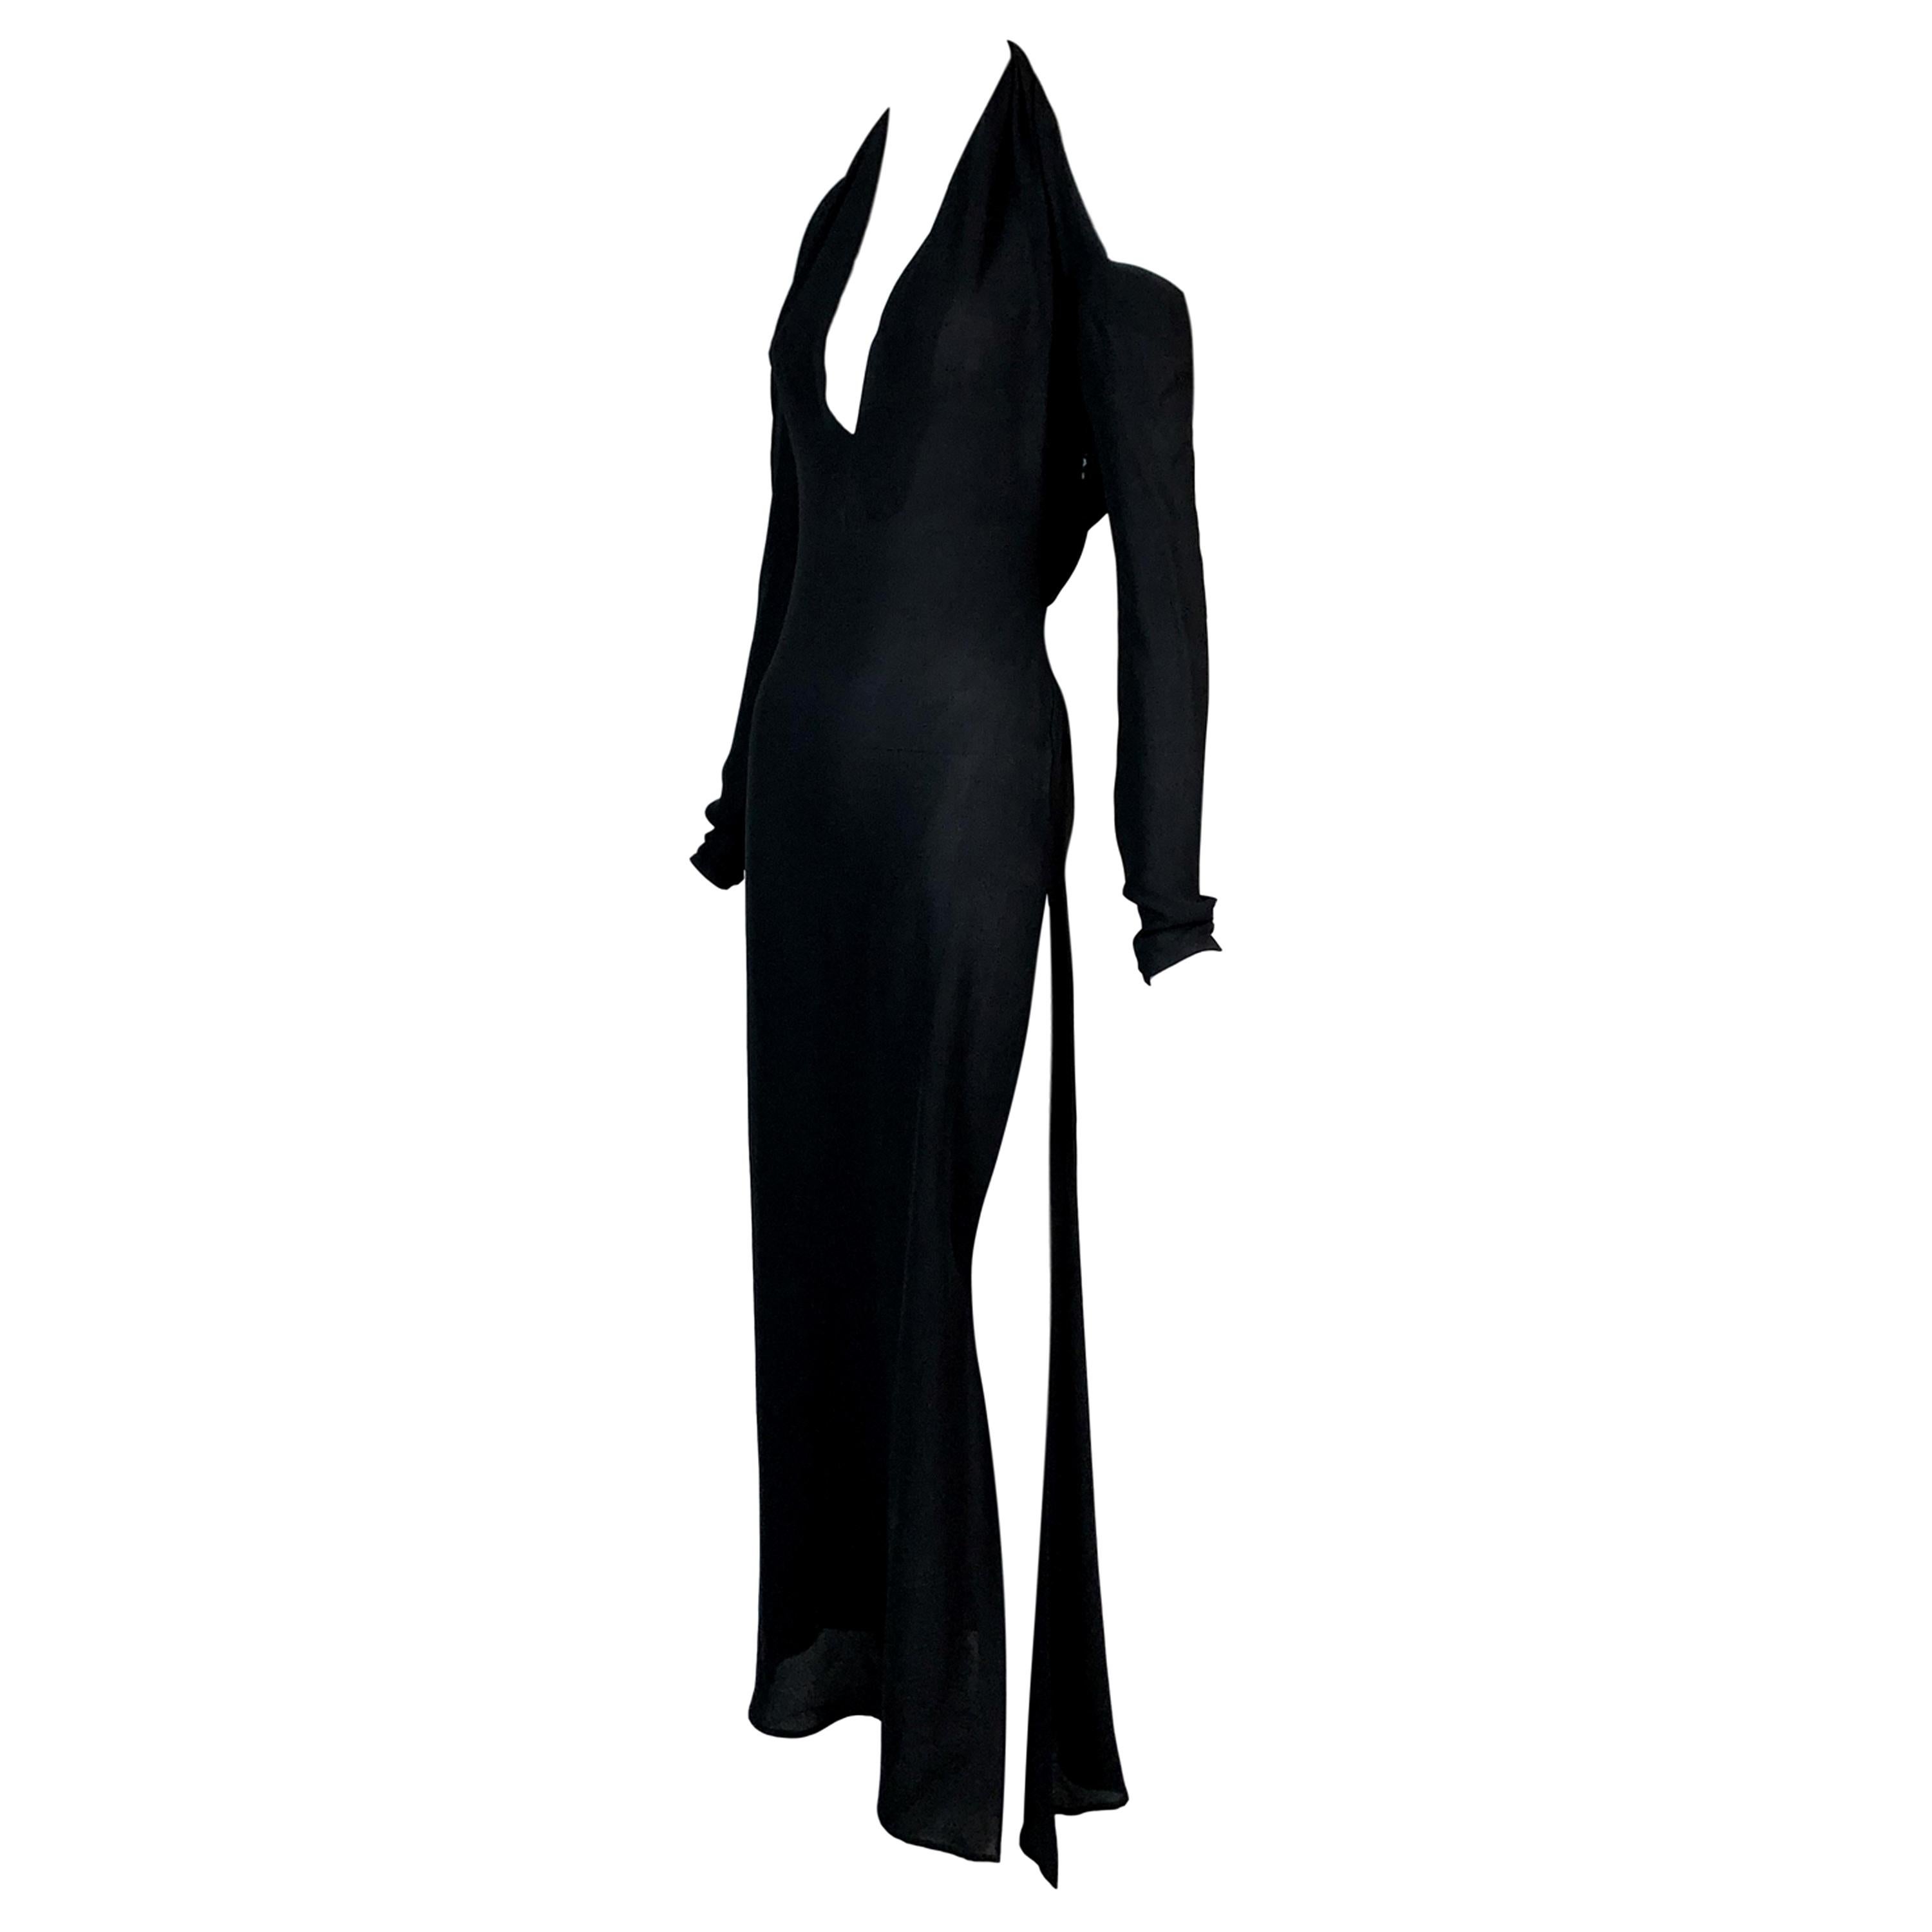 2001 Yves Saint Laurent Tom Ford Semi-Sheer Plunging High Slit Gown Maxi Dress